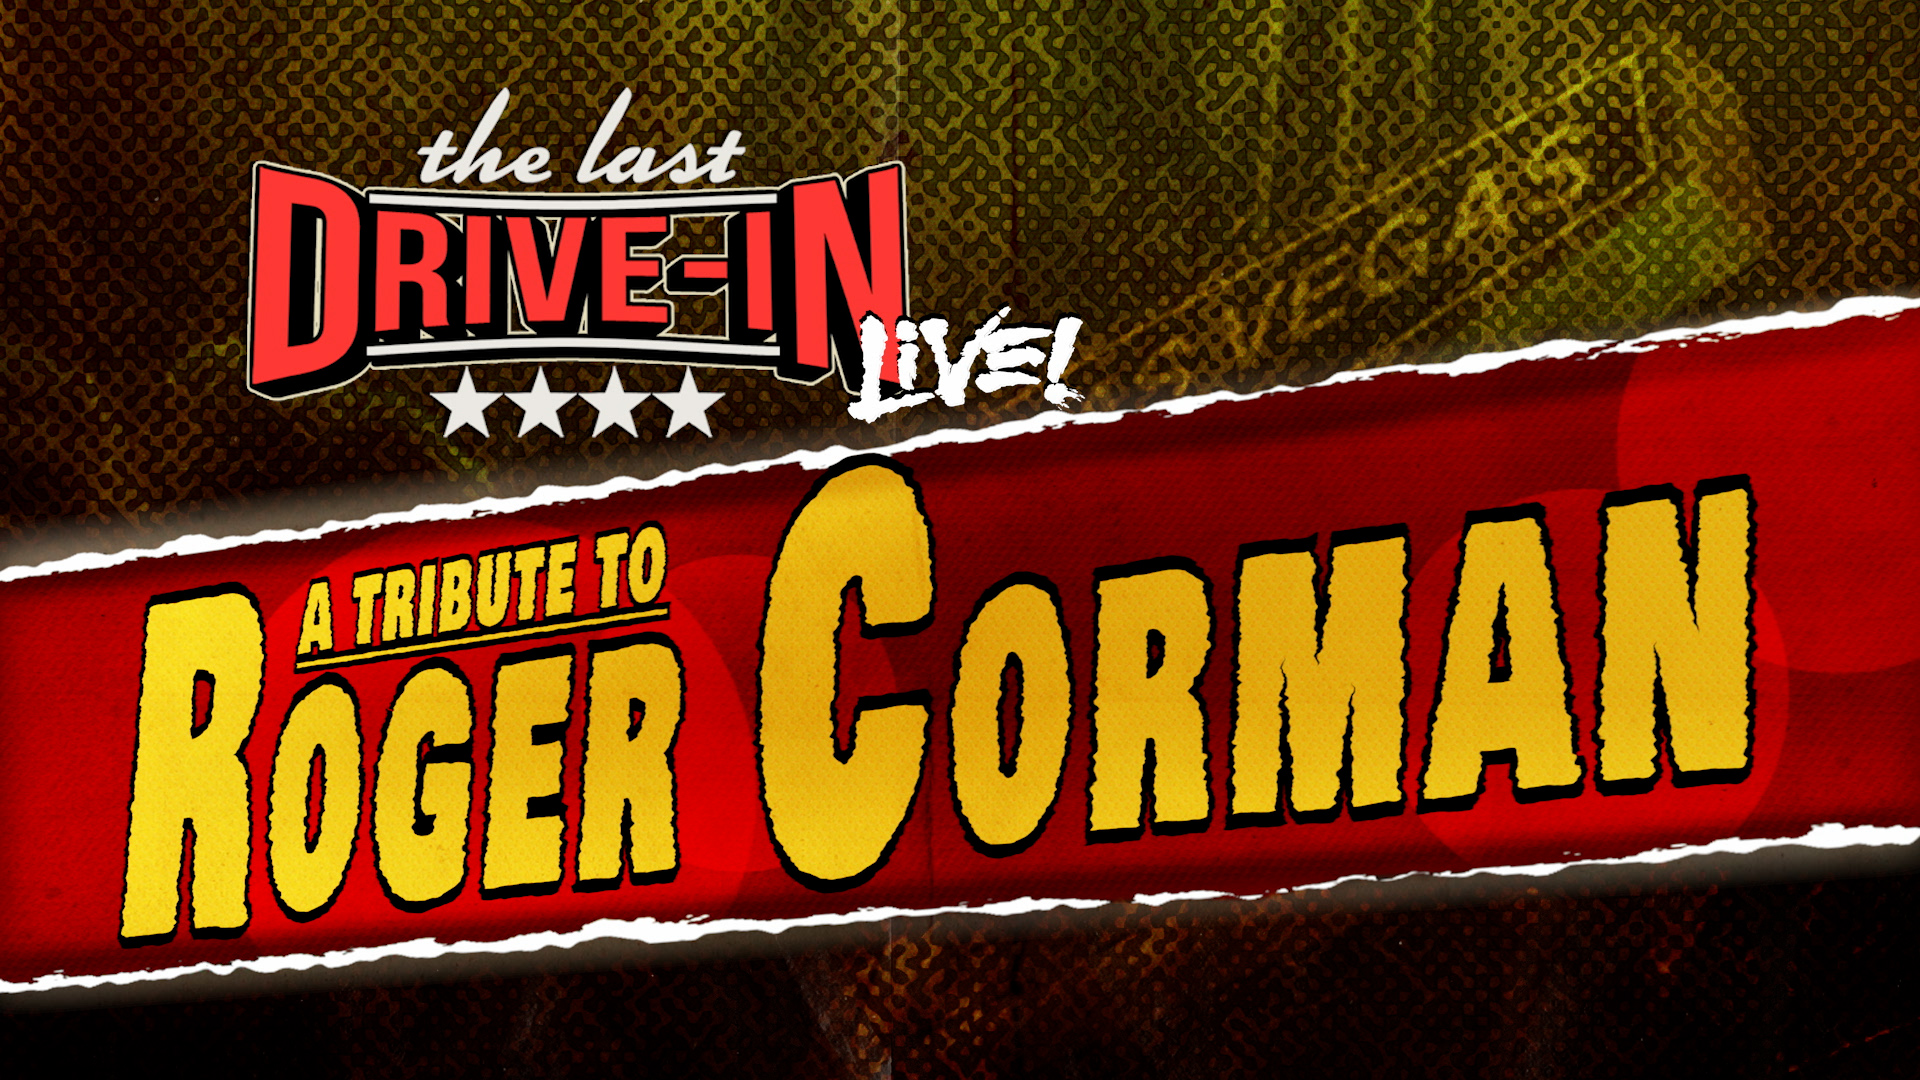 The Last Drive In Live: A Tribute to Roger Corman